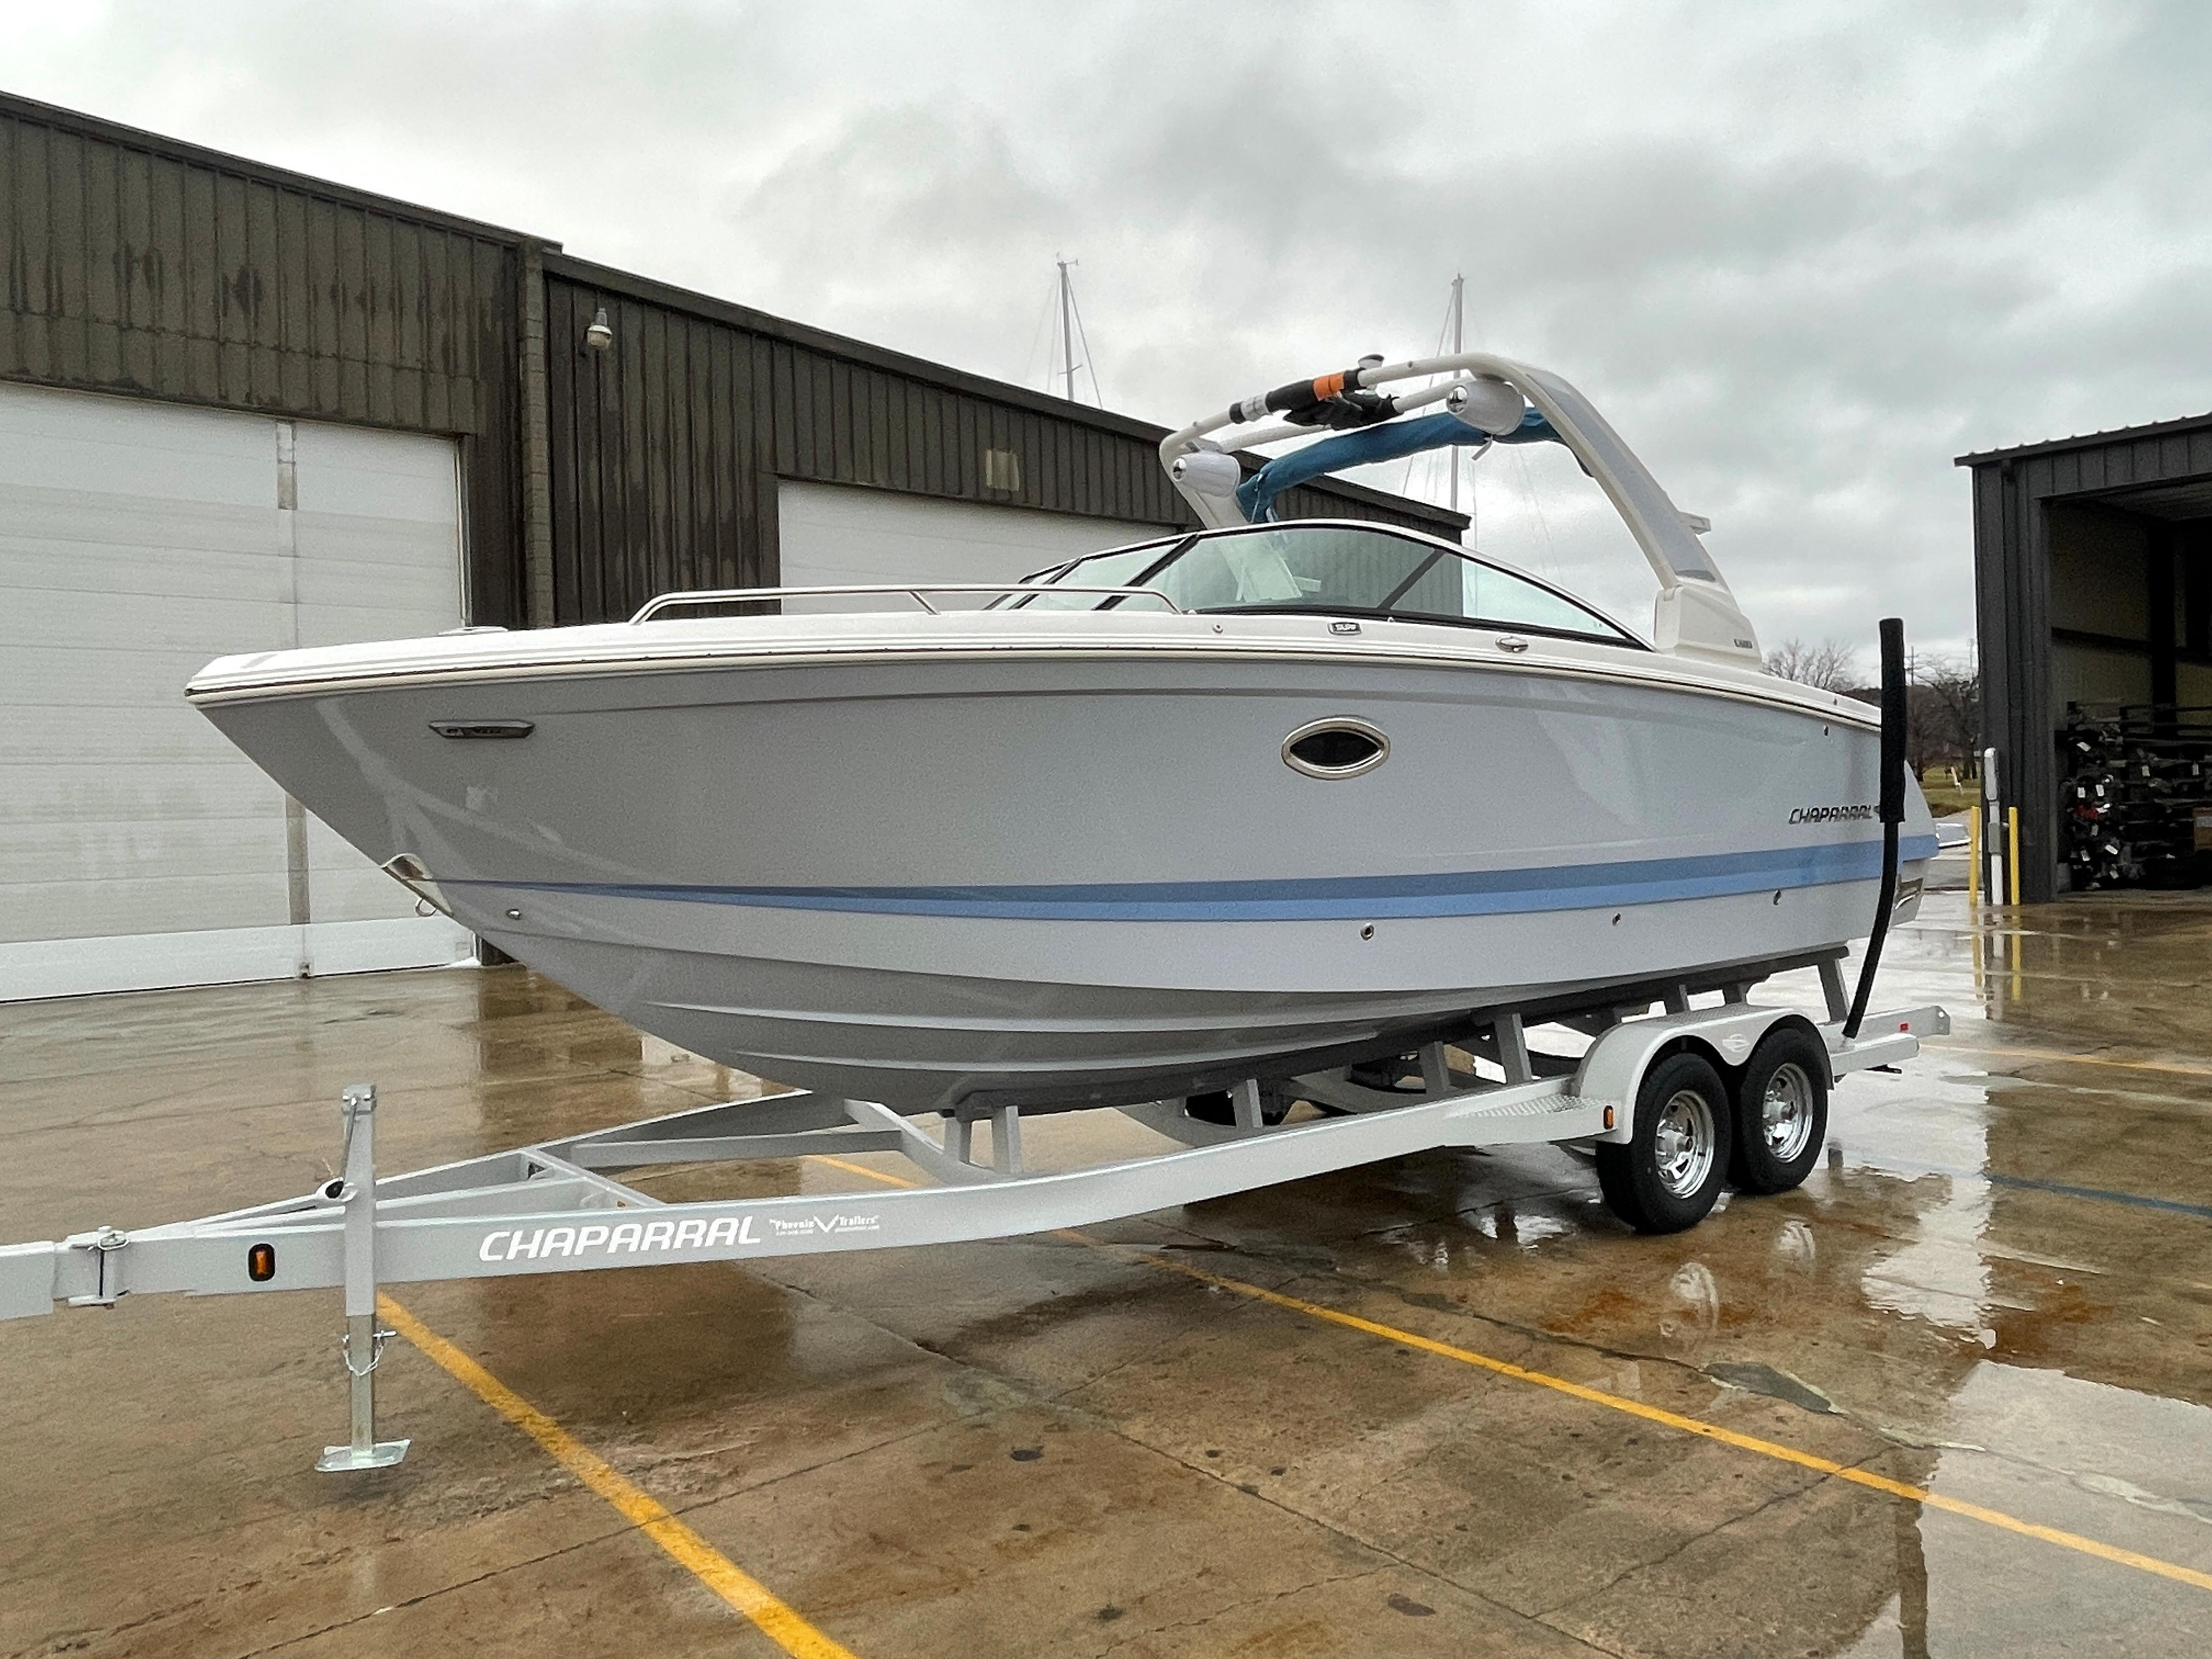 2023 Chaparral 28 Surf Ski and Wakeboard for sale - YachtWorld